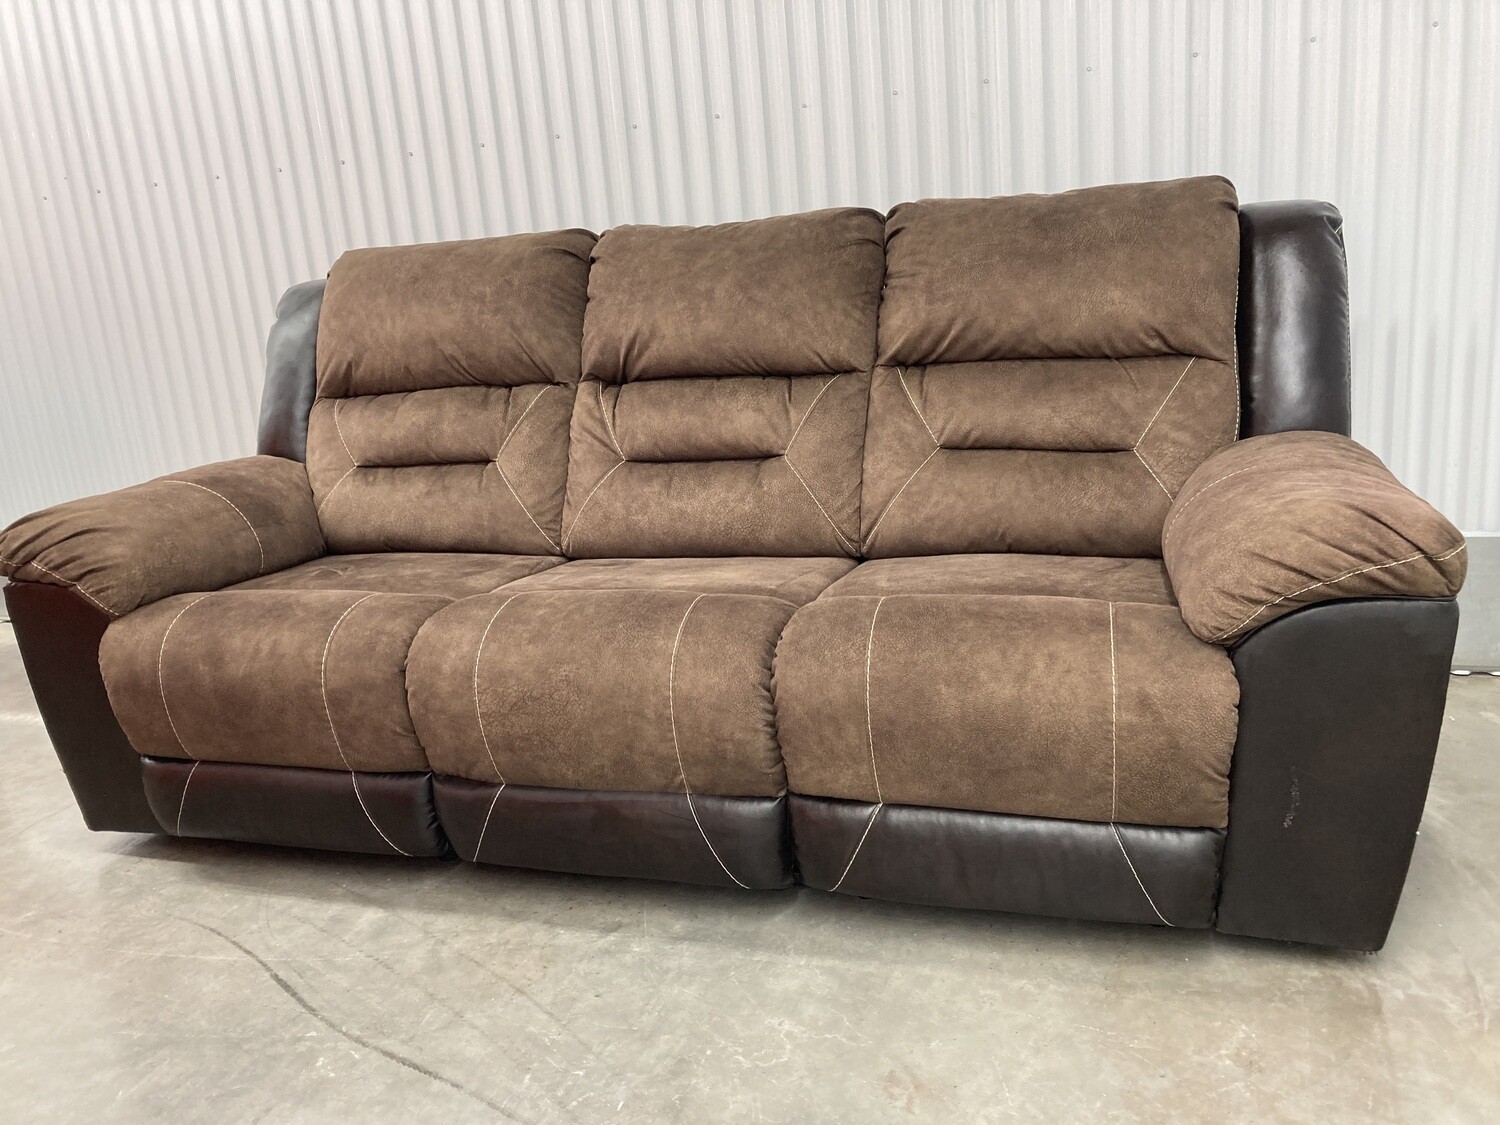 Wall-hugger Reclining Sofa, brown fabric & faux leather #1337